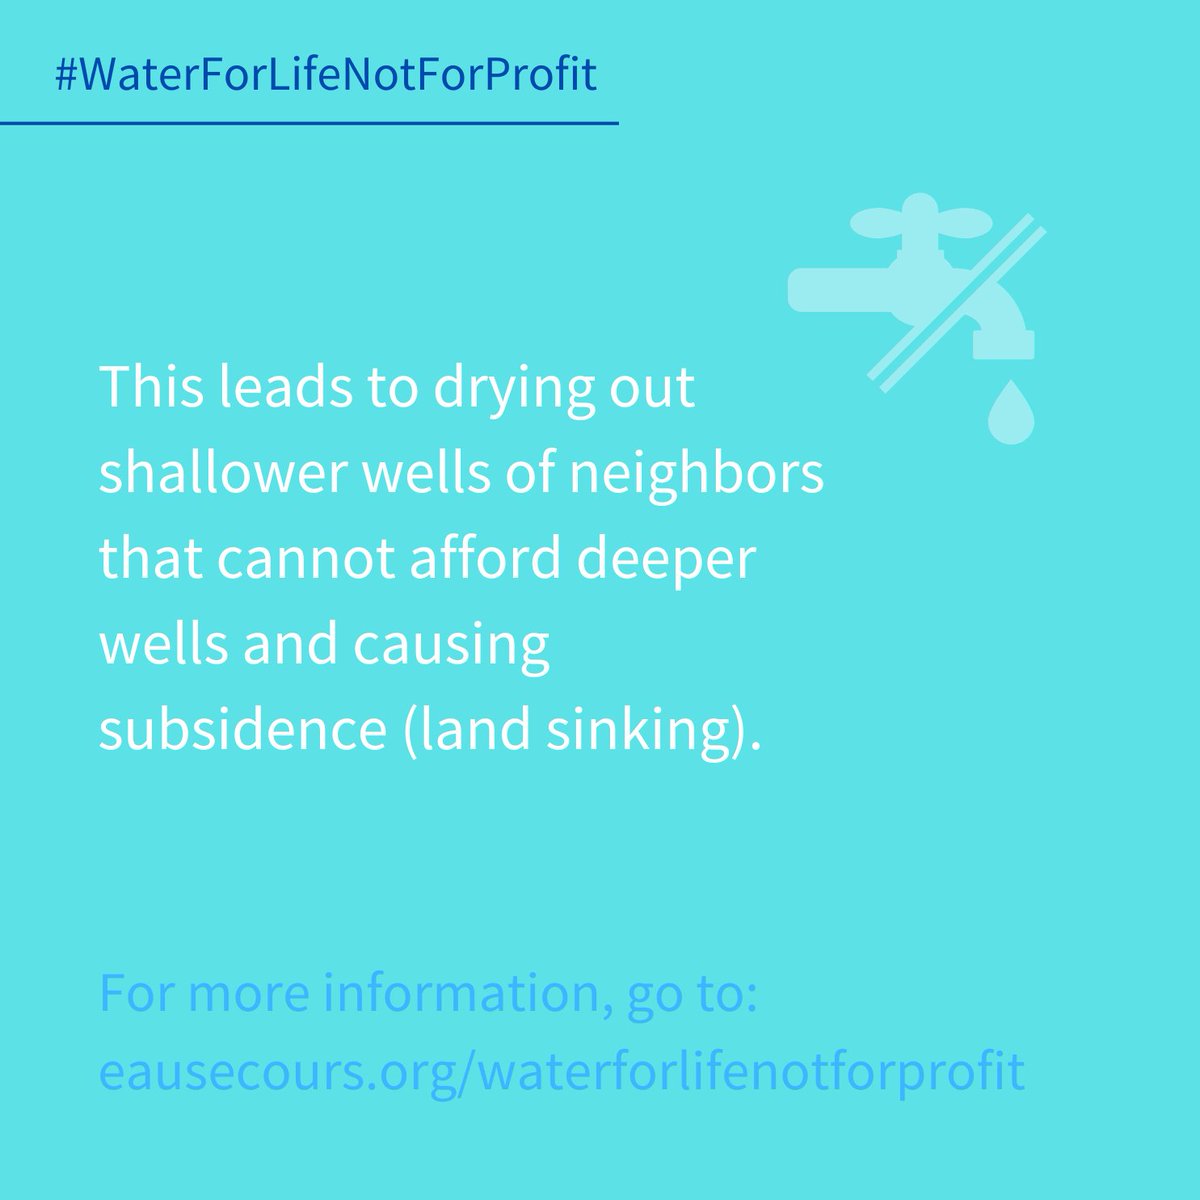 As world leaders discuss climate change’s severe impacts on water at #COP28, water activists & advocates protect water from financial and corporate interests: eausecours.org/waterforlifeno…
Day 3 of #WaterForLifeNotForProfit Misuse of supplies that should be protected